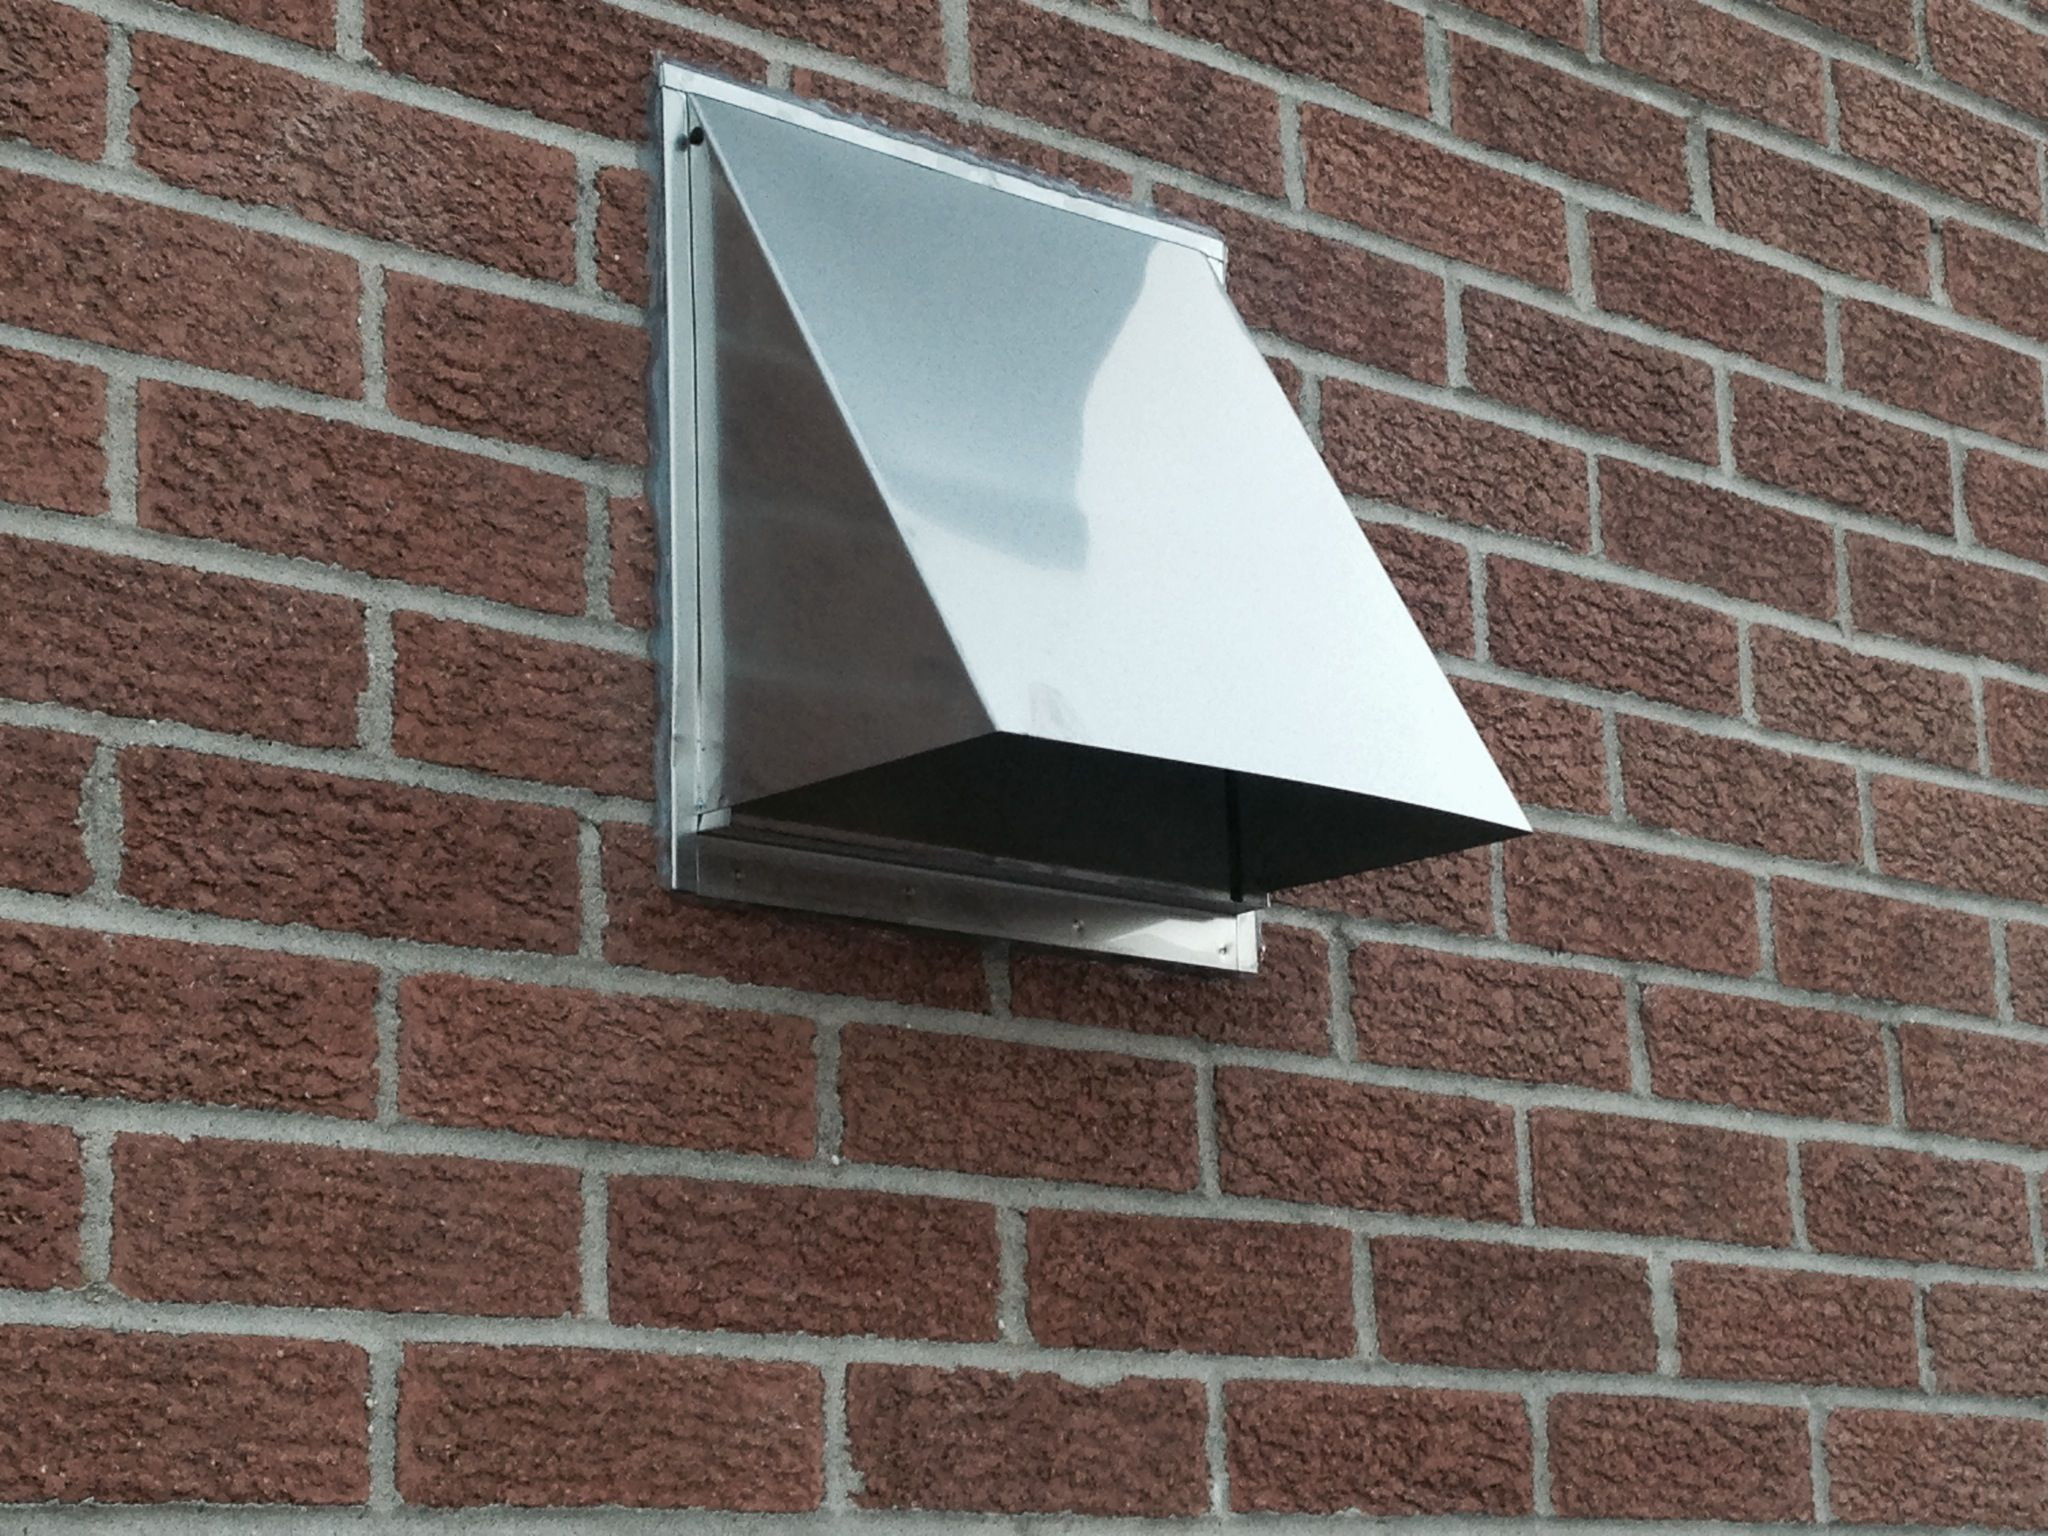 Kitchen Exhaust Vent Wall Cap
 Exterior Wall Vent Covers Wall Coverings